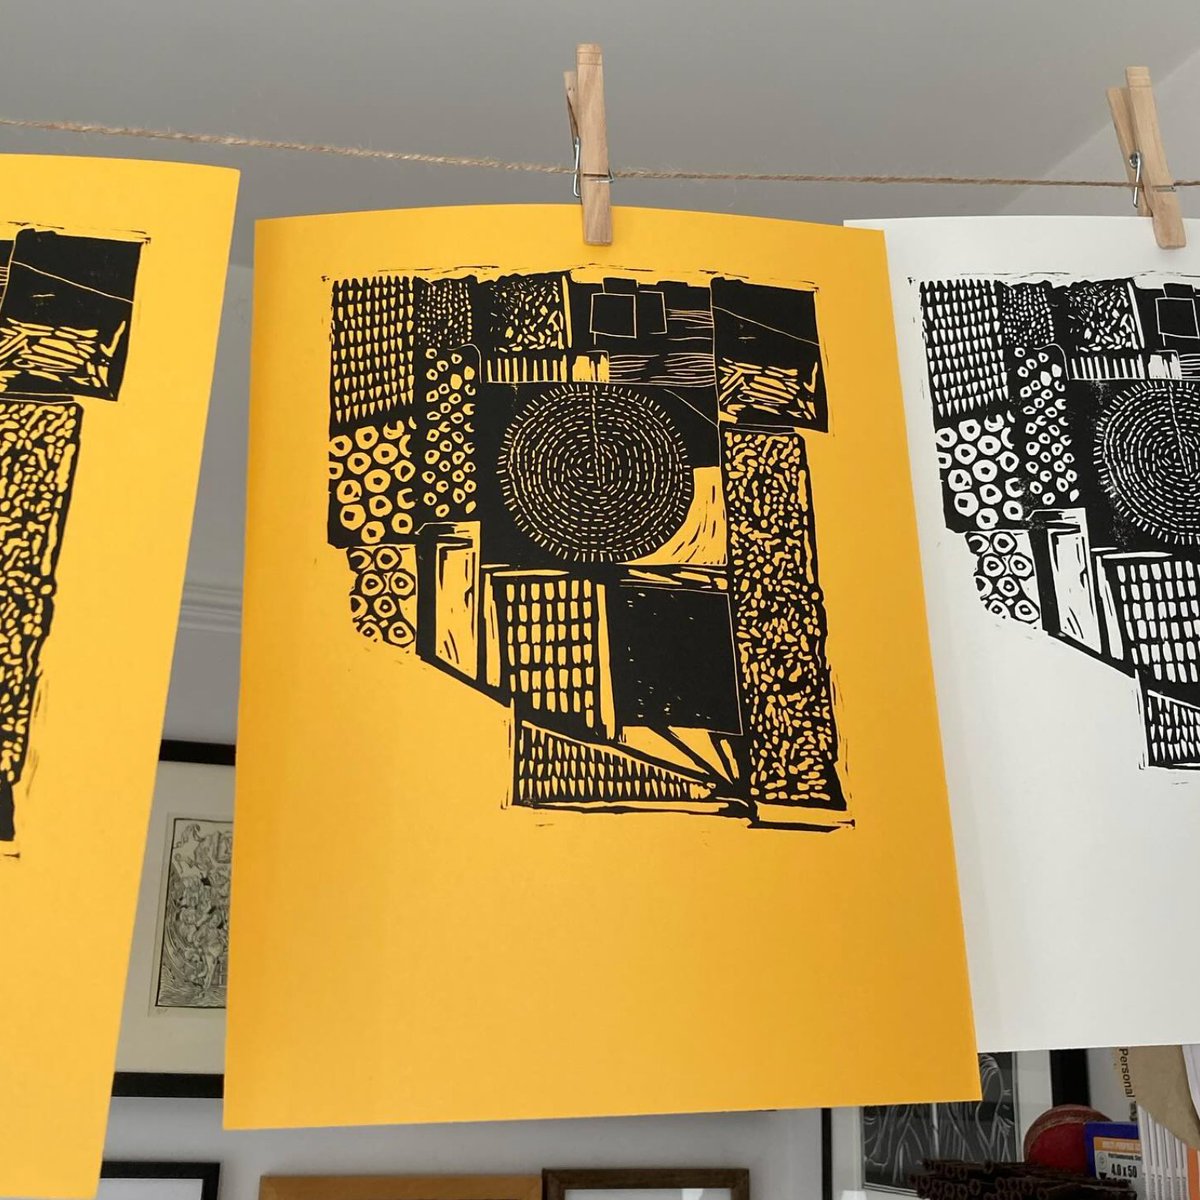 Coming up at Ikon this week: Thurs 11 – Fri 12 April: Printmaker Simon Harris will operate the printing press. 11am – 5pm. Sat 13 April: @DASH_ARTS will operate the printing press. 11am – 4pm. Sun 14 April: Ikon Print Fair. 11am-4pm. Learn more: tinyurl.com/4w3s99w7